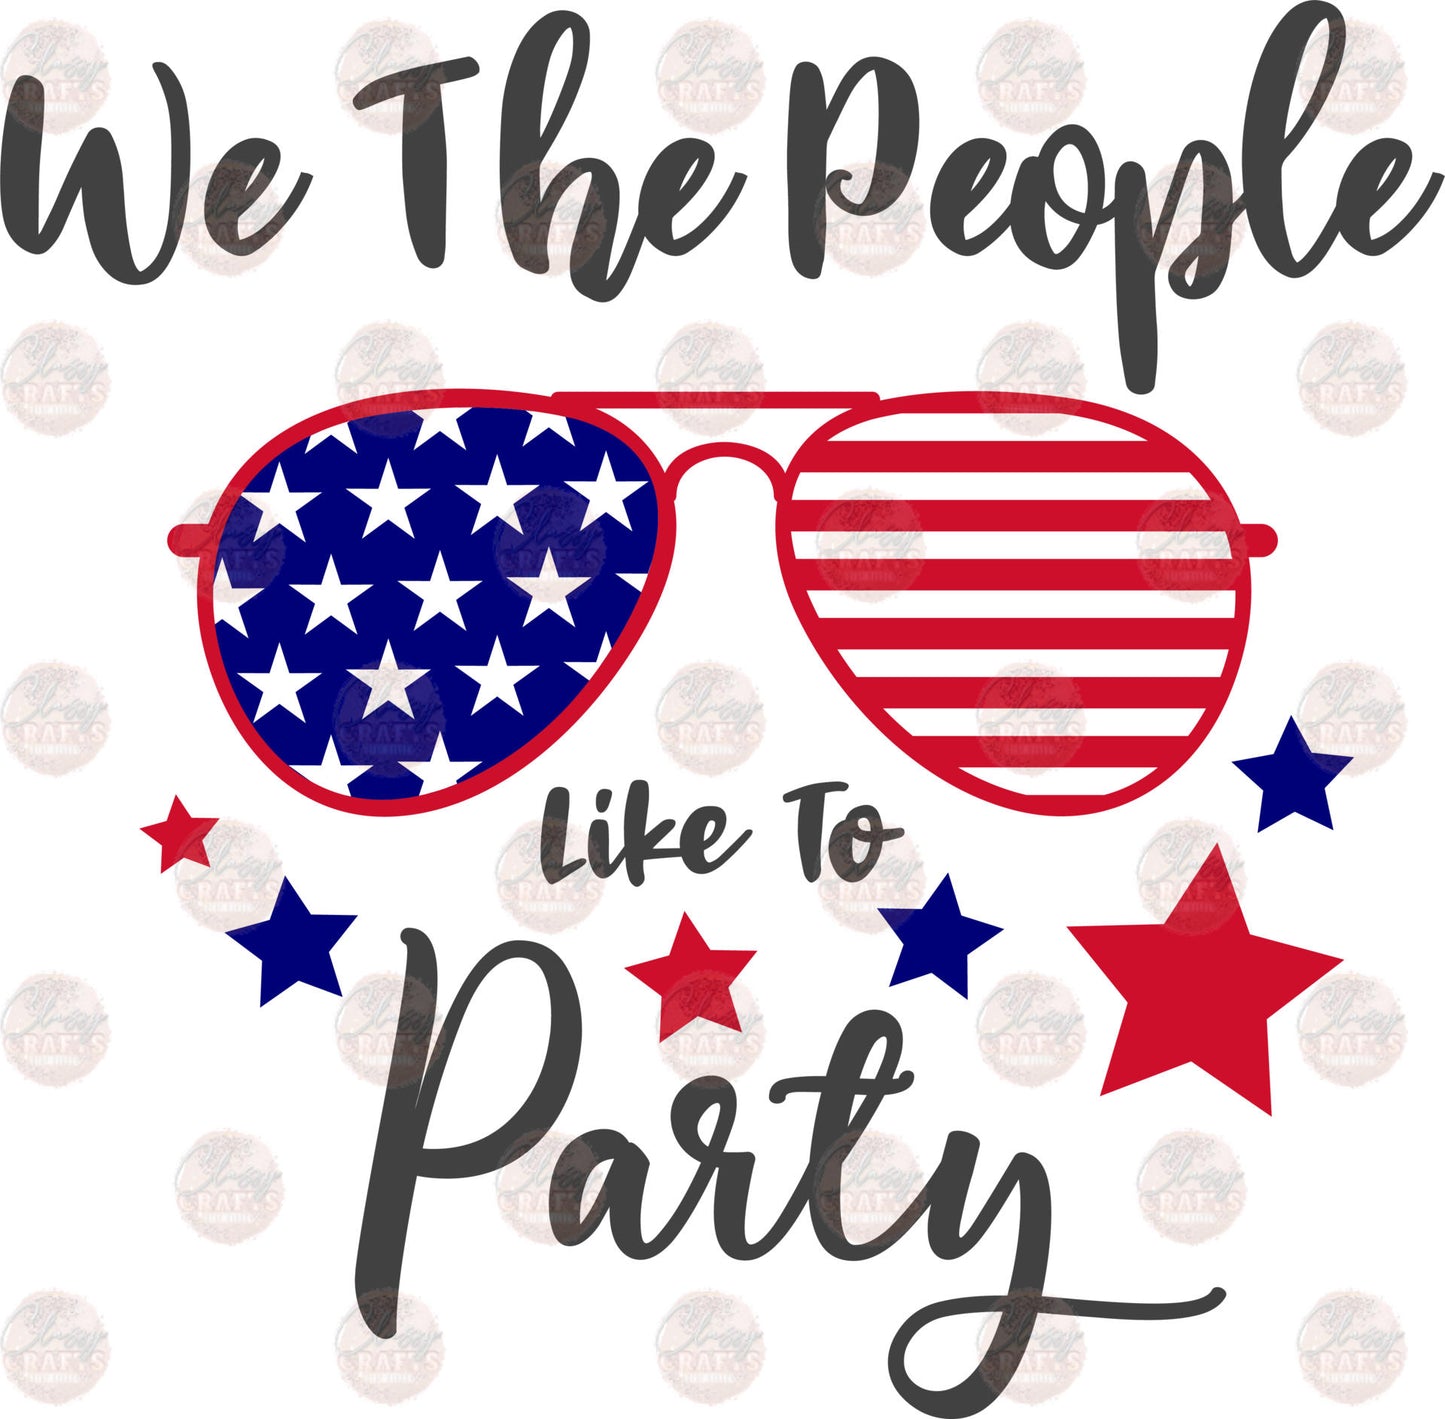 We The People Like To Party - Sublimation Transfer